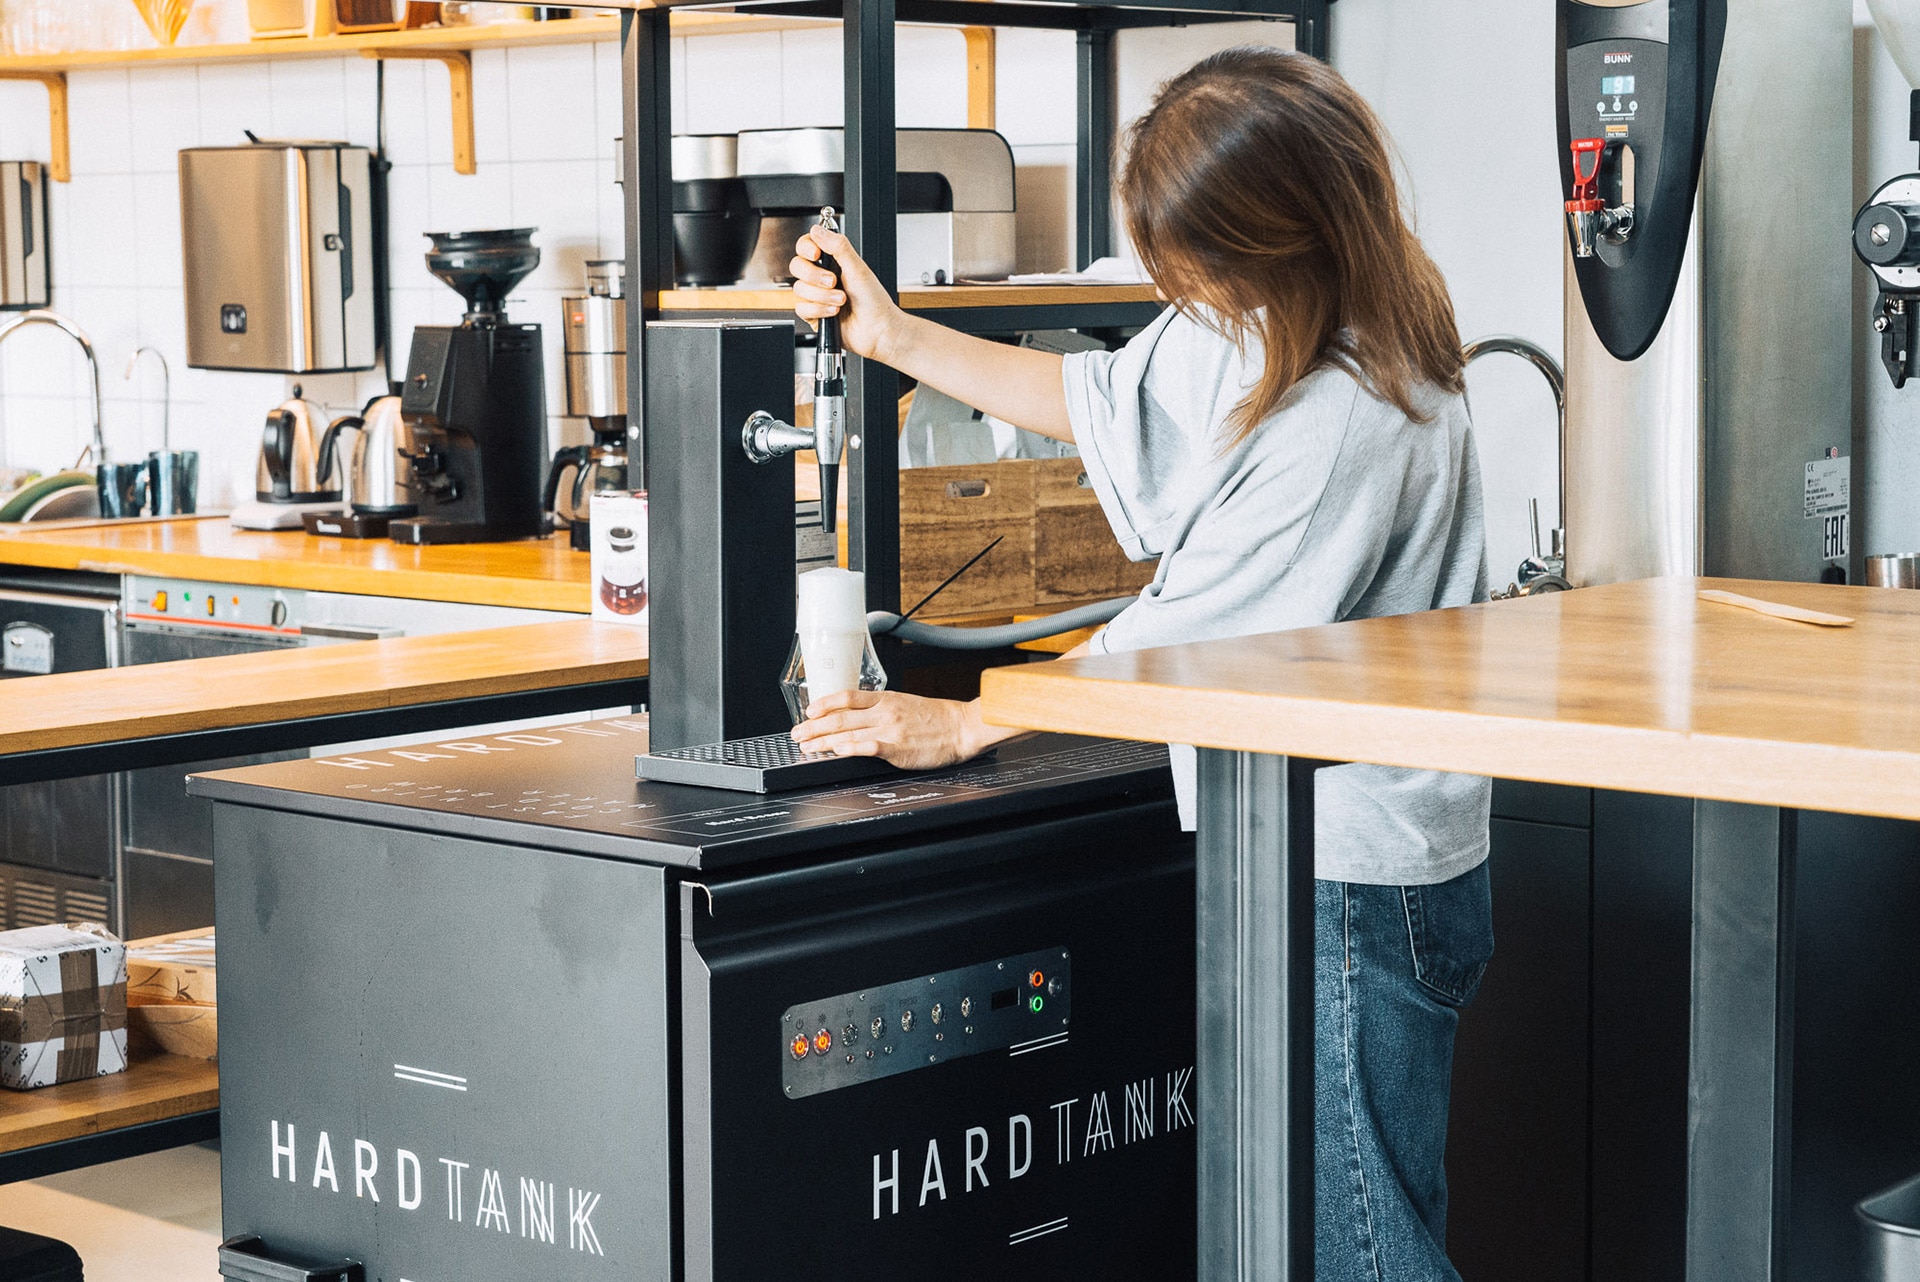 Natalia Biss With Hardtank Assistant At Hard Beans Coffee Roasters (1)